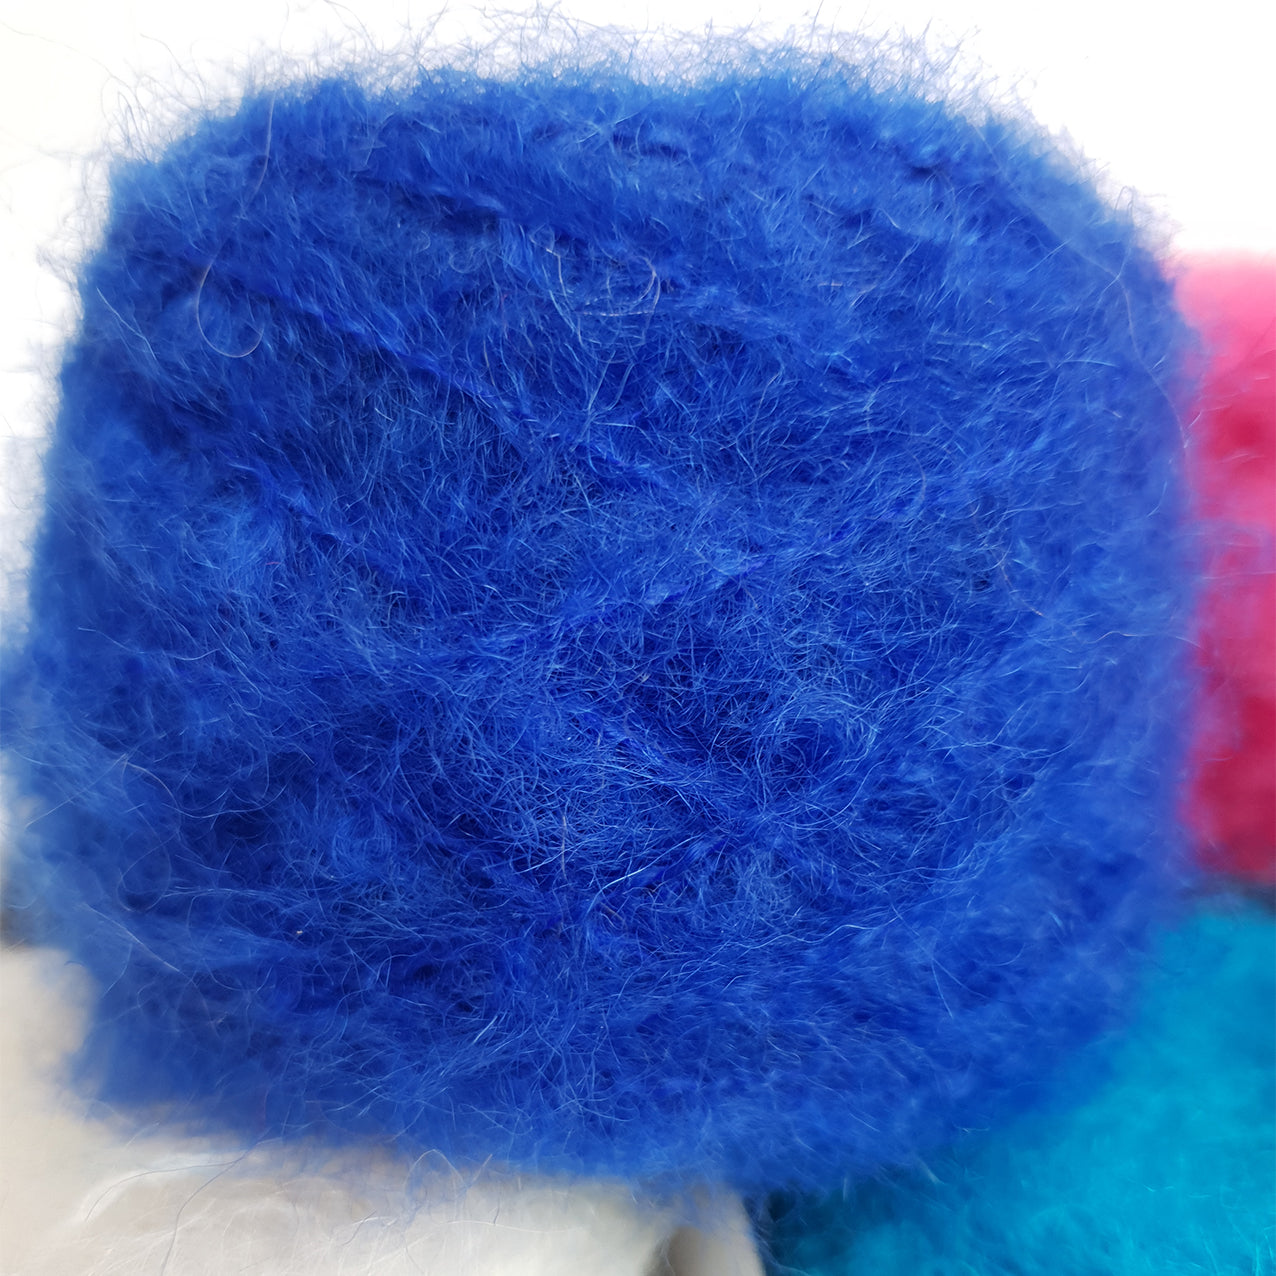 Brushed Mohair Yarn, Electric Blue, 50g Ball